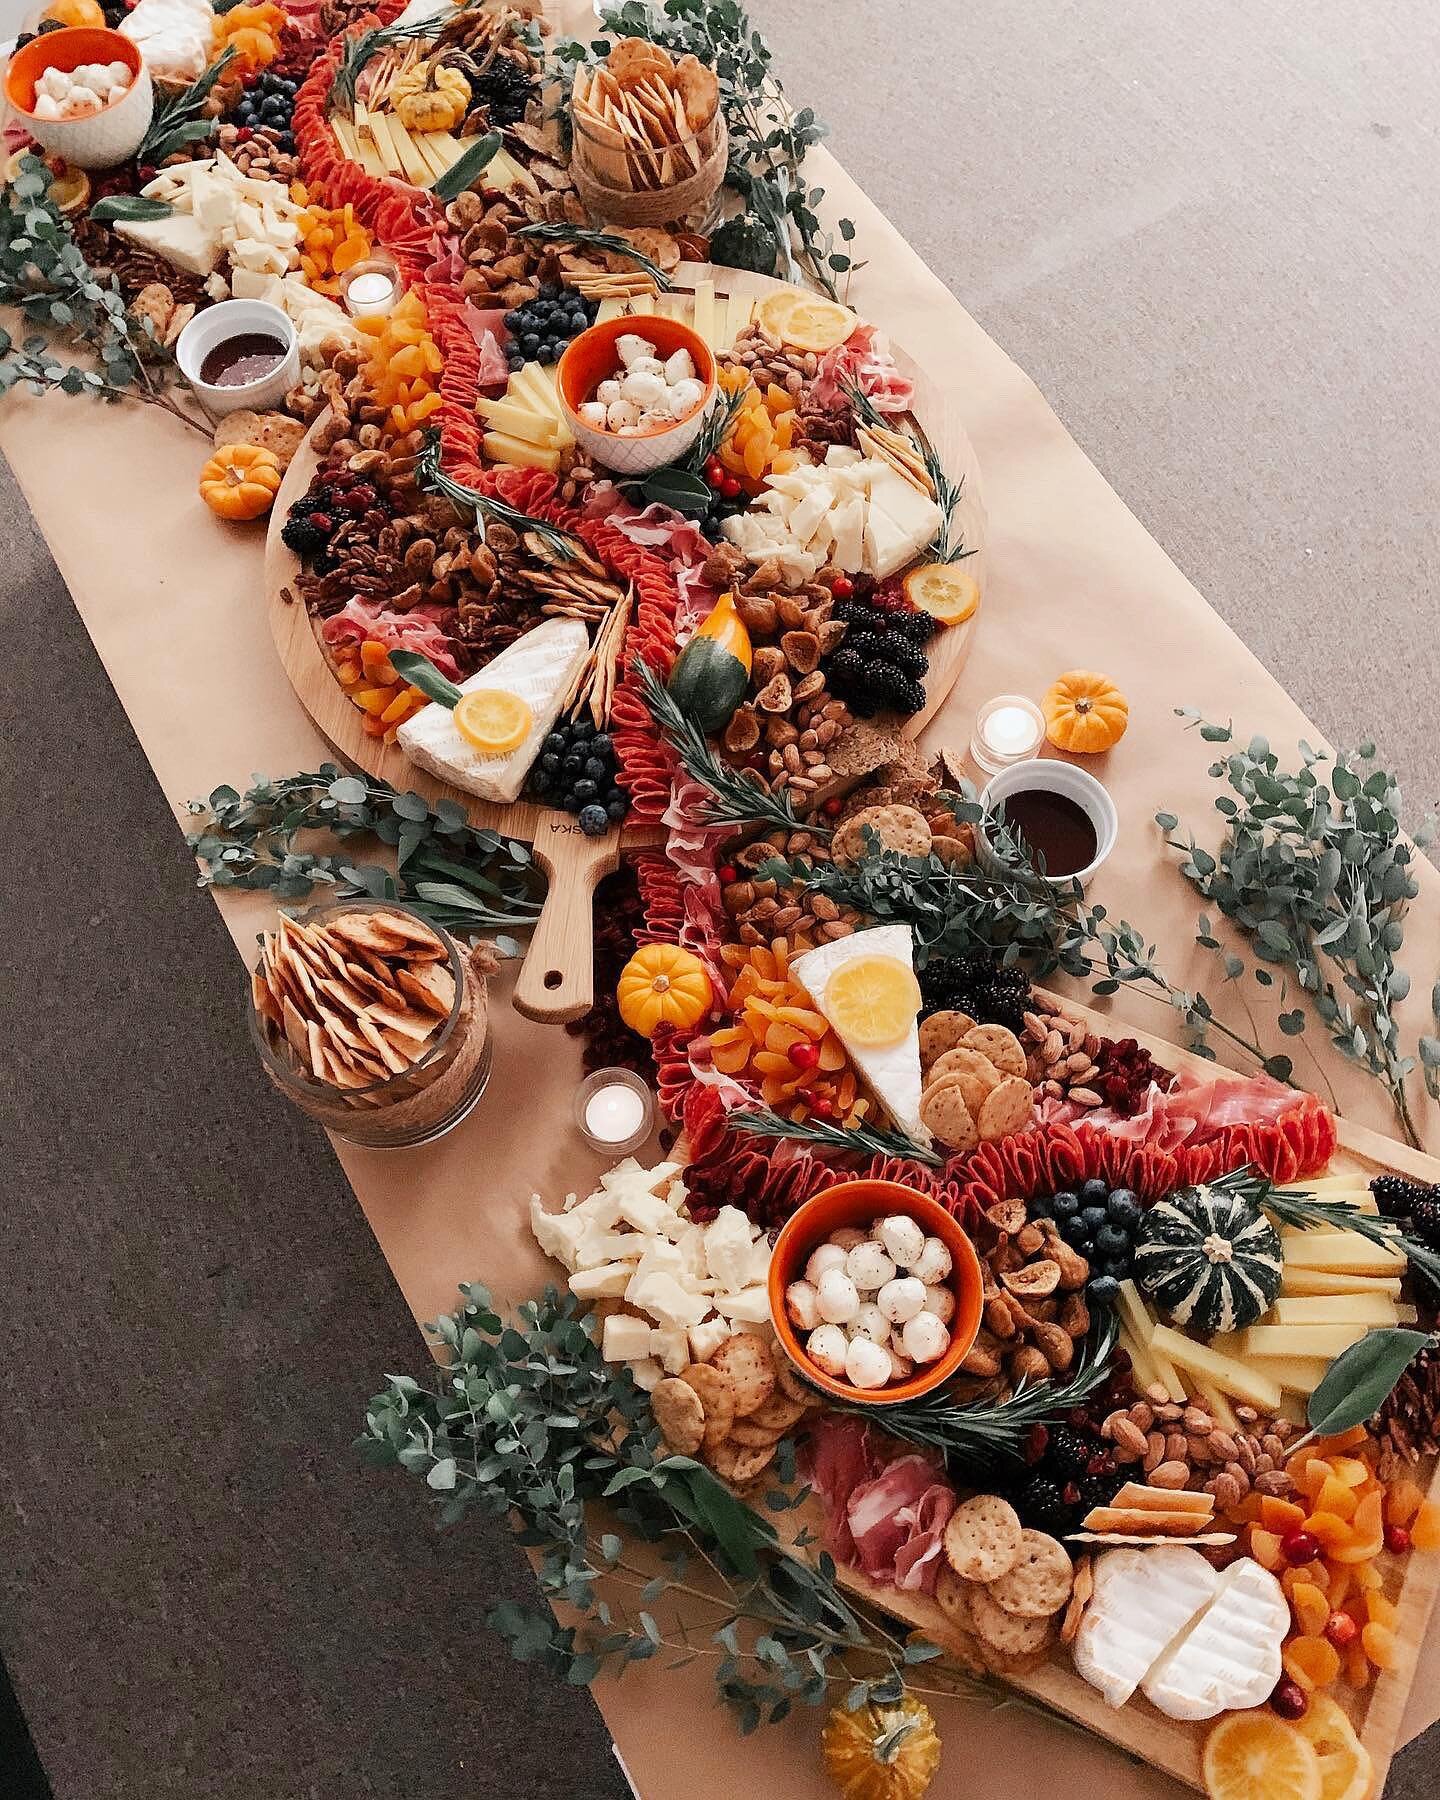 SWIPE TO BUILD ➡️ That &ldquo;Autumnal Graze&rdquo; Plate (more like table) as seen on @ThatCheesePlate today. Time to bring out the #Fallcuterie! Went next level with this Salami Nile River. ⁣⁣
⁣
With a grazing table, I like to set my foundation fir